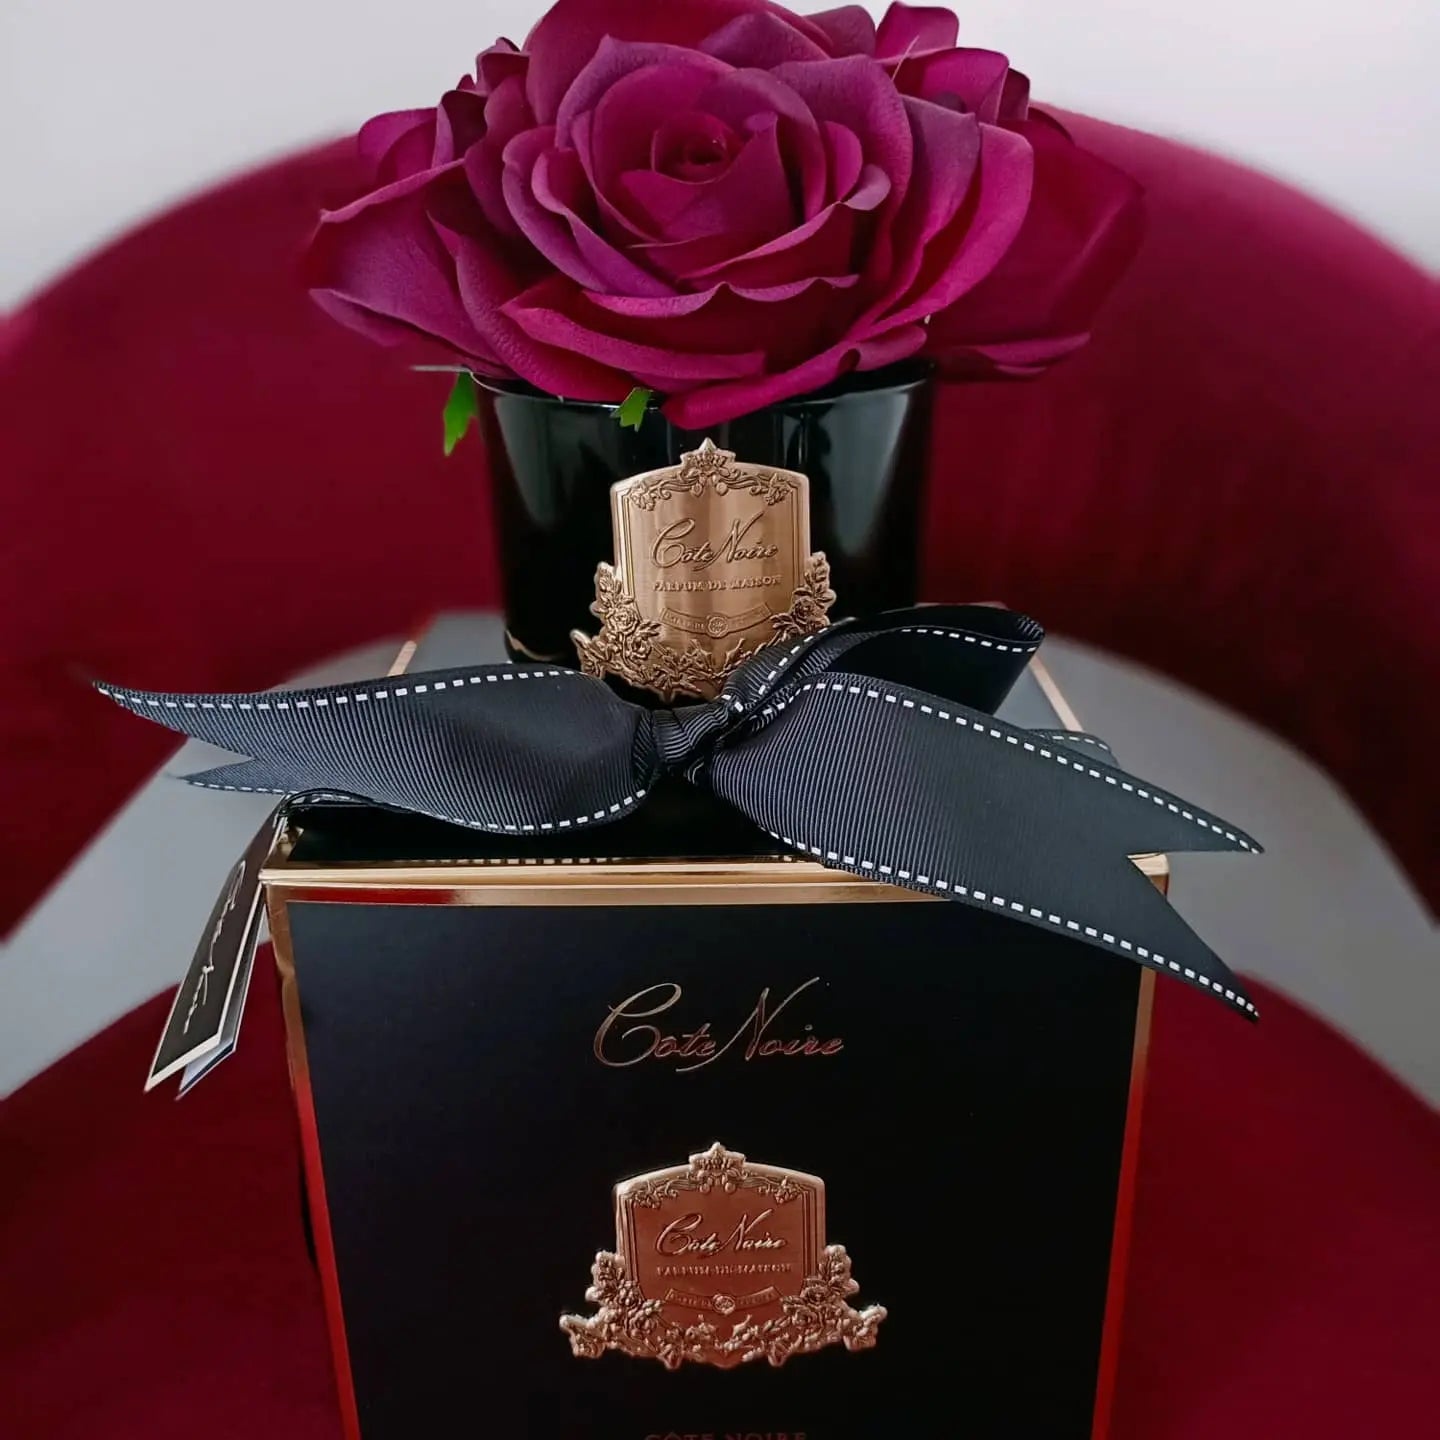 The image showcases an exquisite product display against a rich, red velvet background. A black glass vase holds an intricately detailed deep purple rose, sitting atop a black and gold gift box. The box is elegantly tied with a black ribbon featuring a white edge and adorned with a gift tag inscribed with "Cote Noire." The gold crest on both the vase and the box adds a touch of opulence to the overall presentation, emphasizing luxury and sophistication.